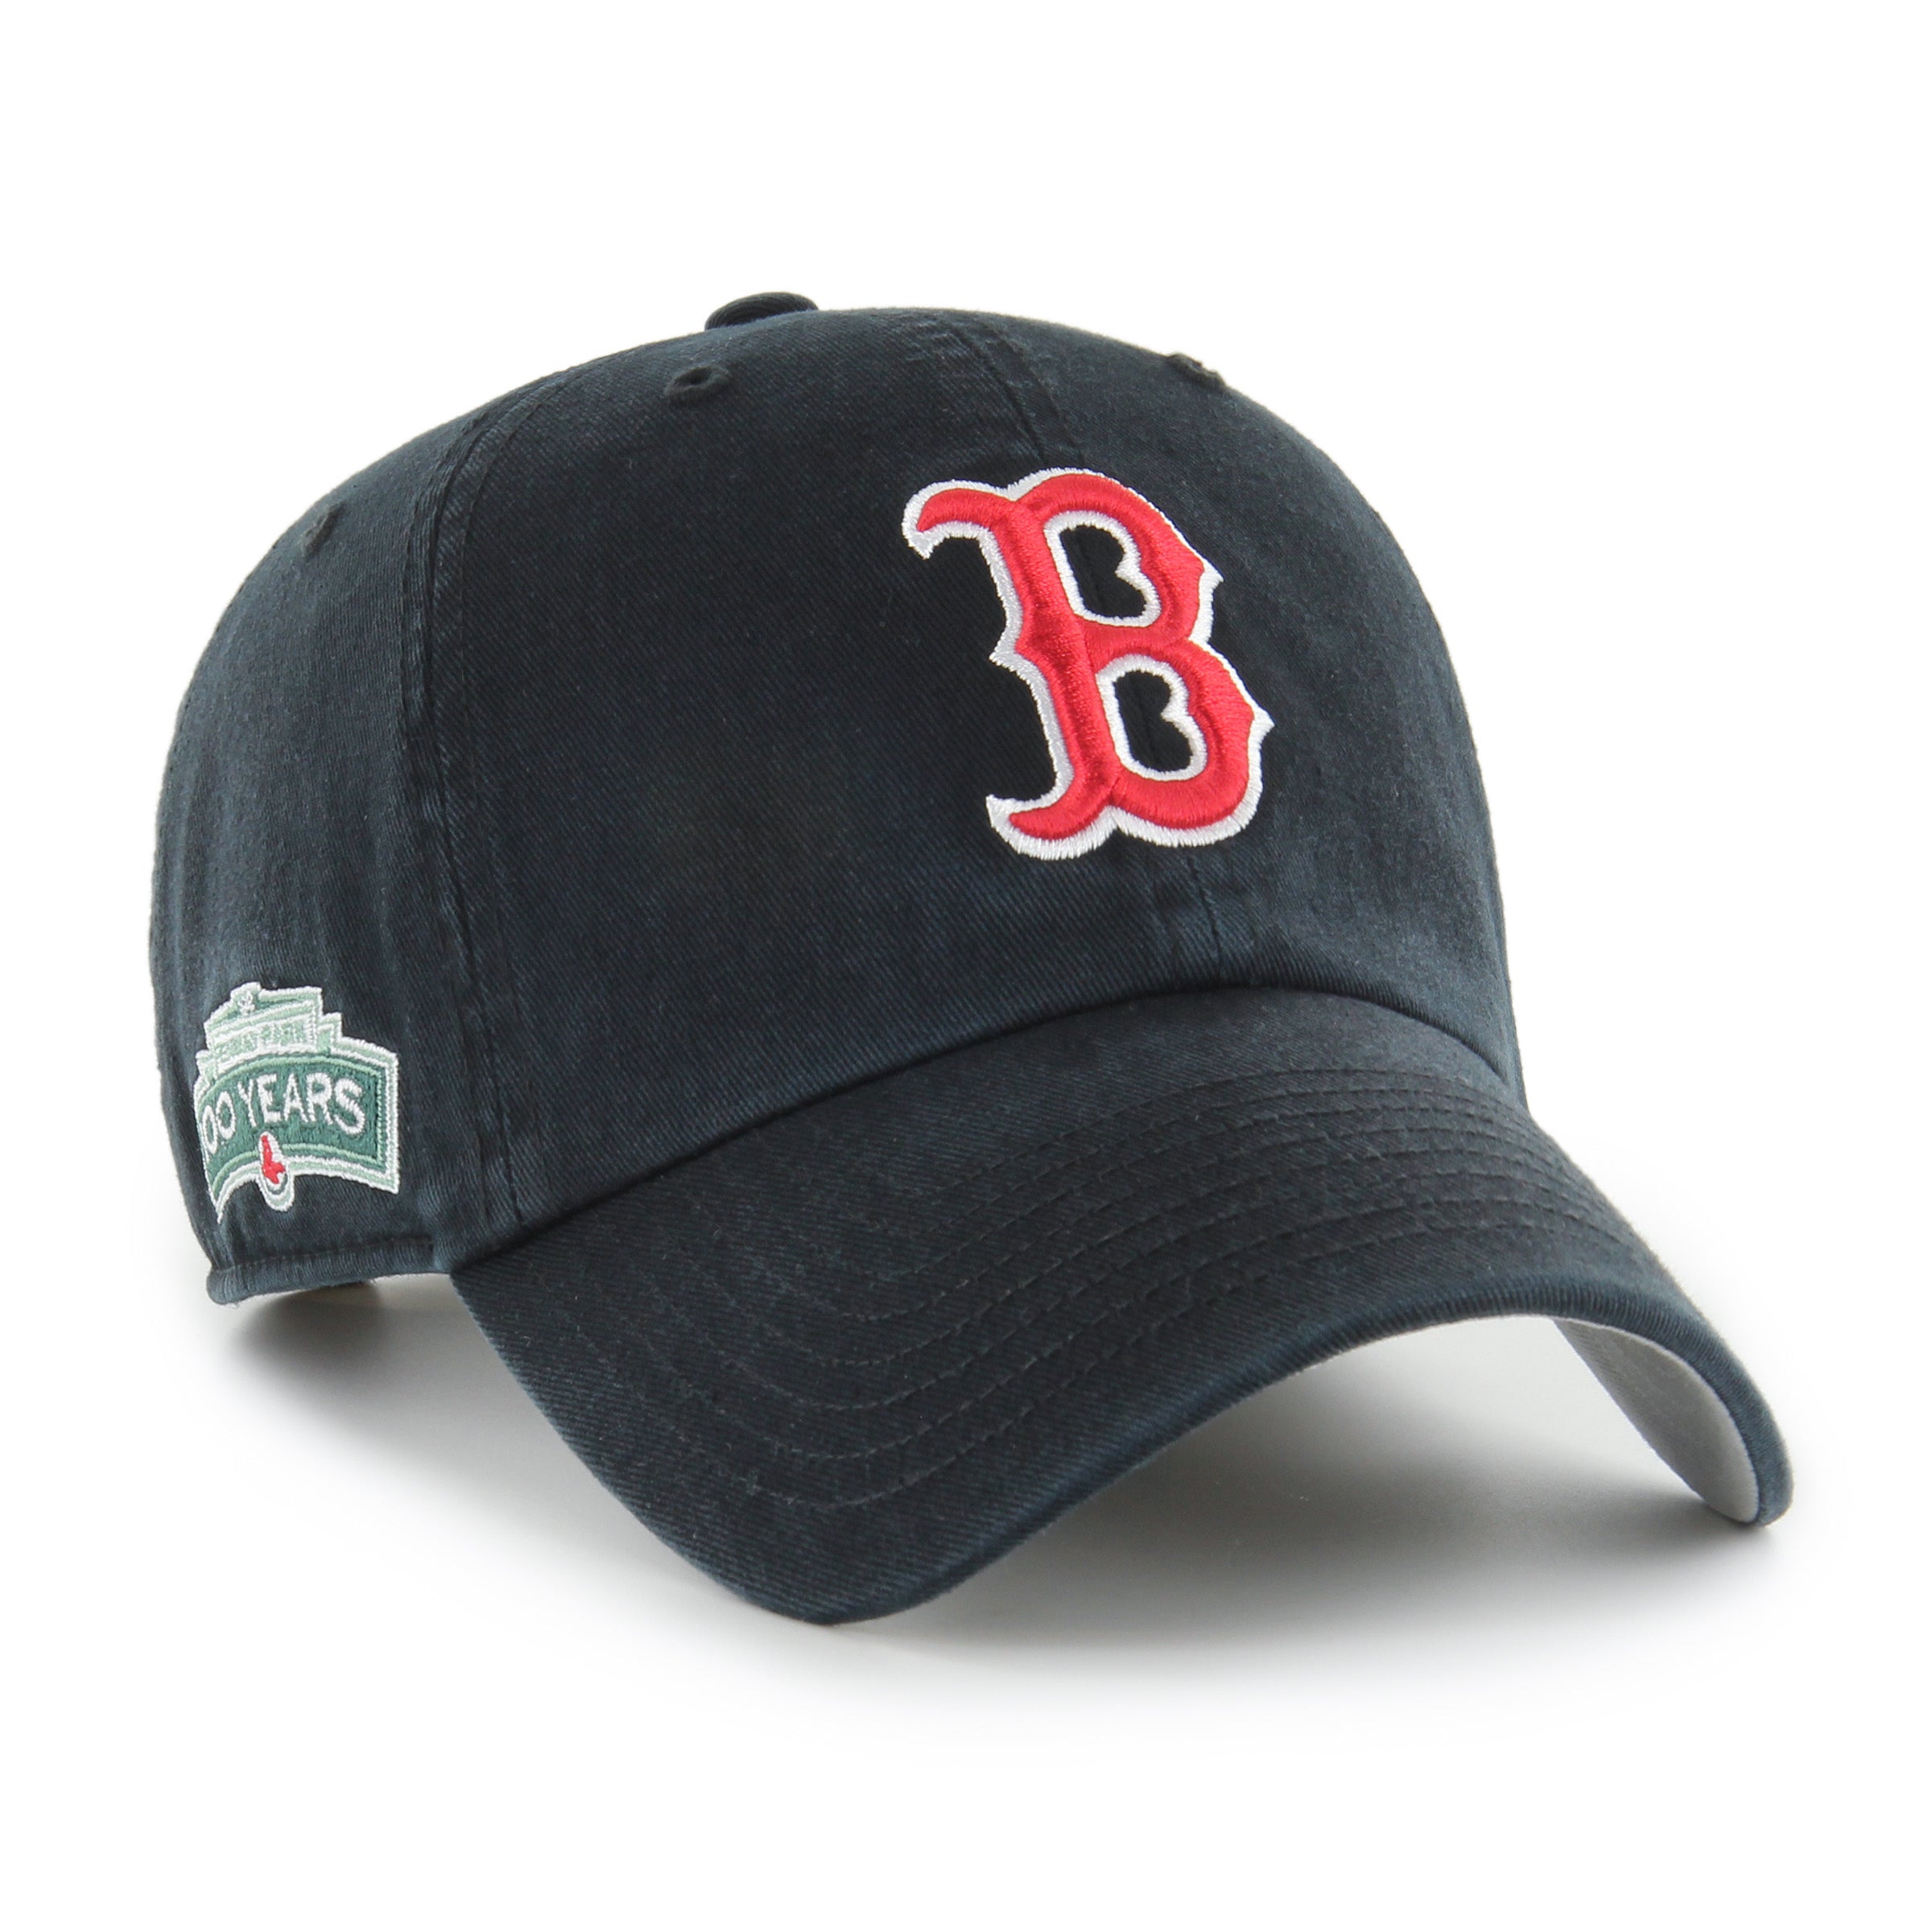 MLB BOSTON RED SOX COOPERSTOWN DOUBLE UNDER 47 CLEAN UP BLACK